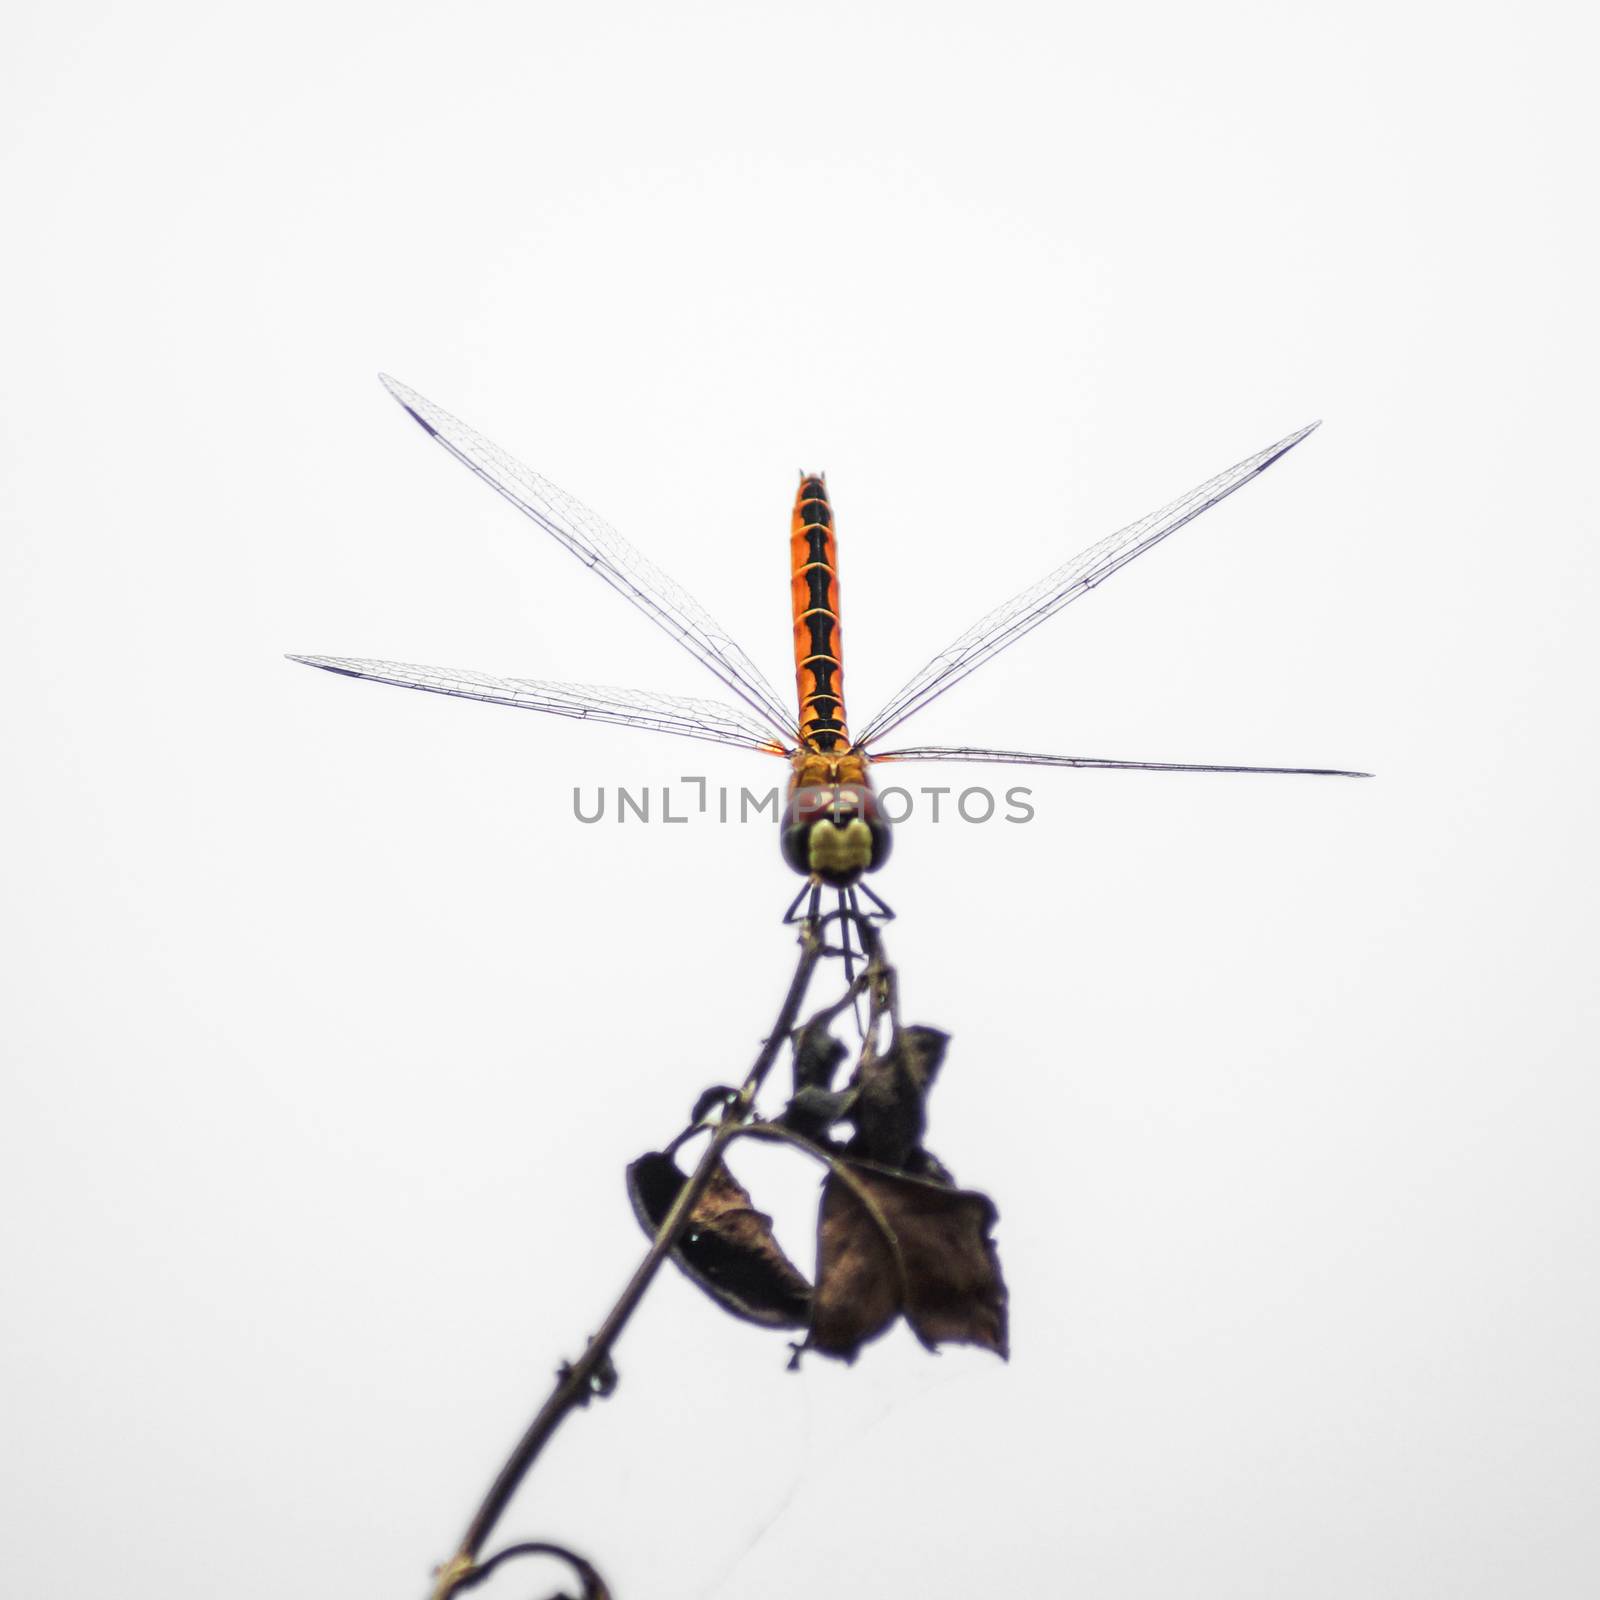 Dragonfly "The red purple male libelluid, Trithemis aurora" on a by Noppharat_th